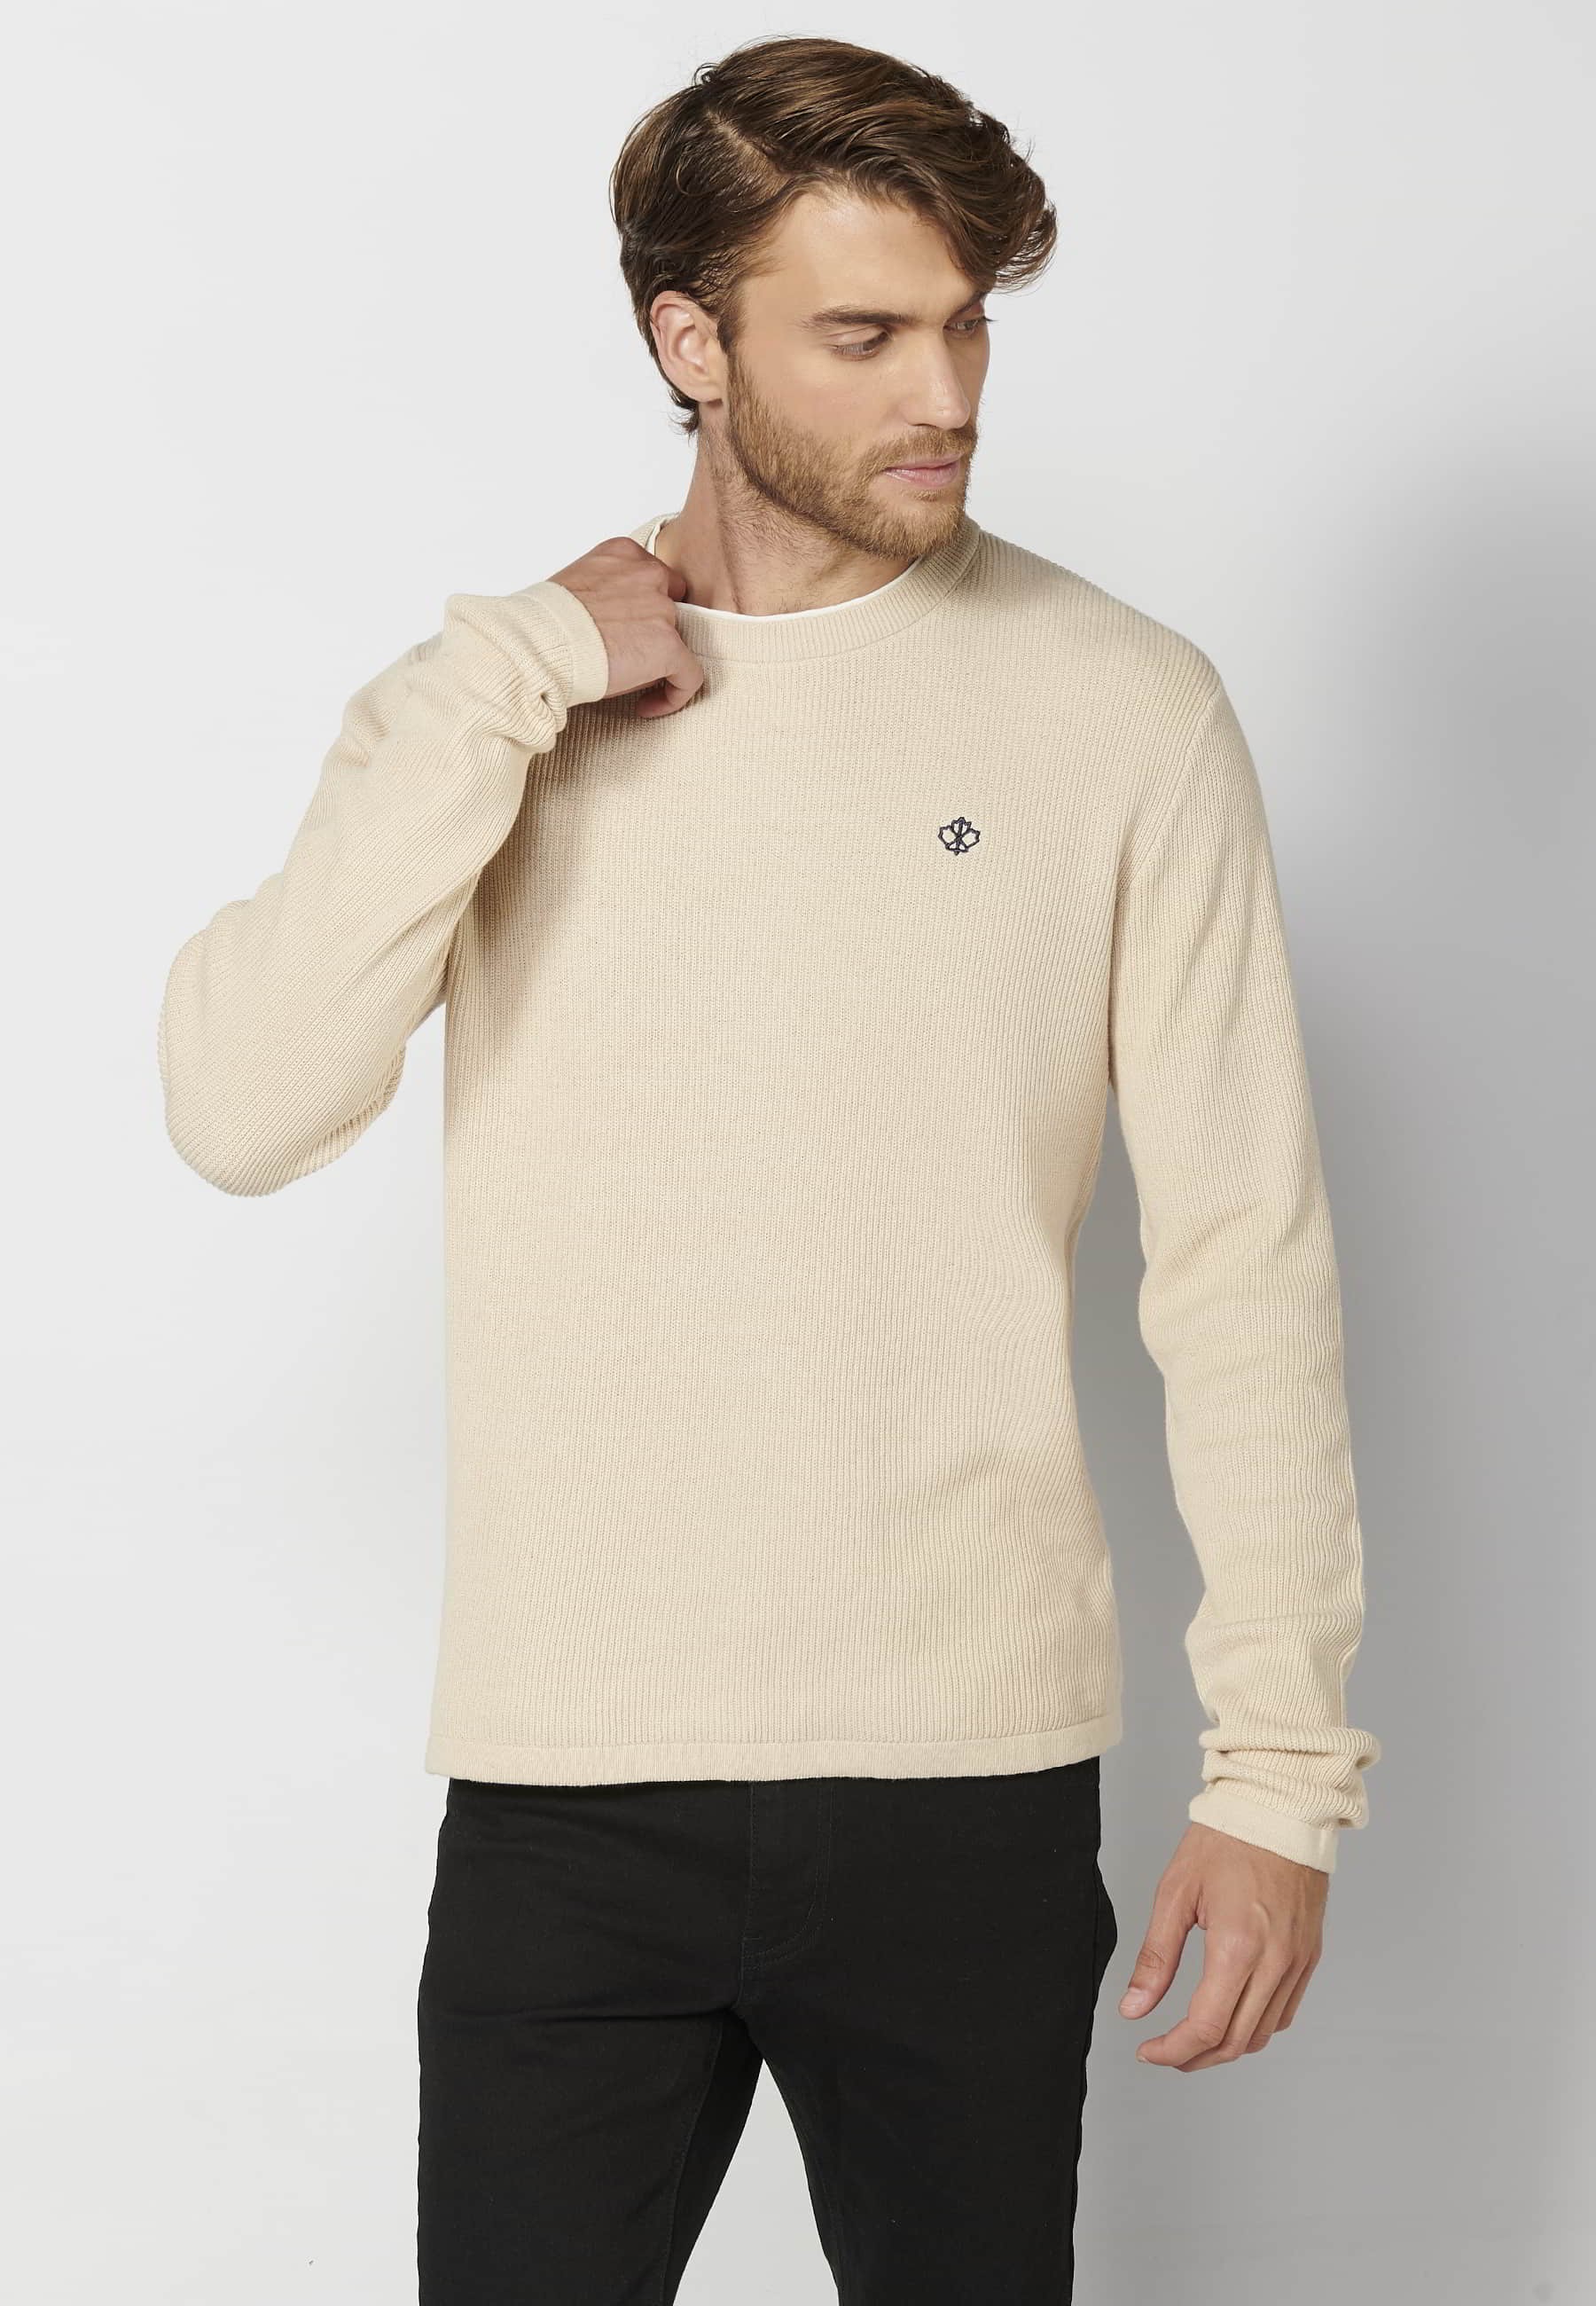 Long-sleeved cotton tricot sweater with embroidered detail in Cream color for Men 2